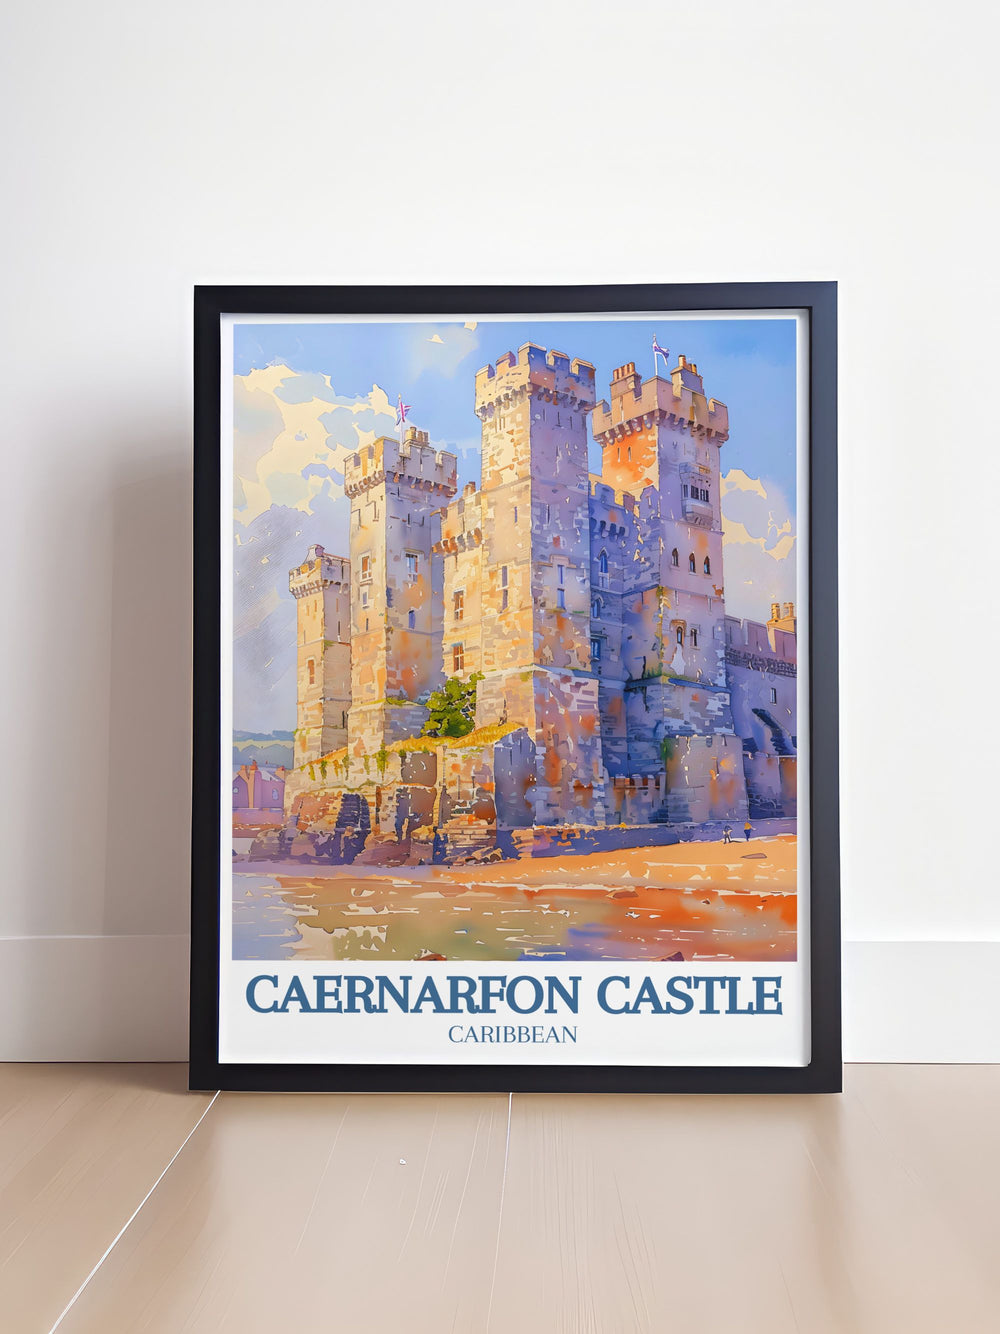 Bring the timeless charm of Caernarfon Castle and the picturesque Castle Square into your home with this vibrant travel poster, perfect for adding a touch of British elegance to your decor.